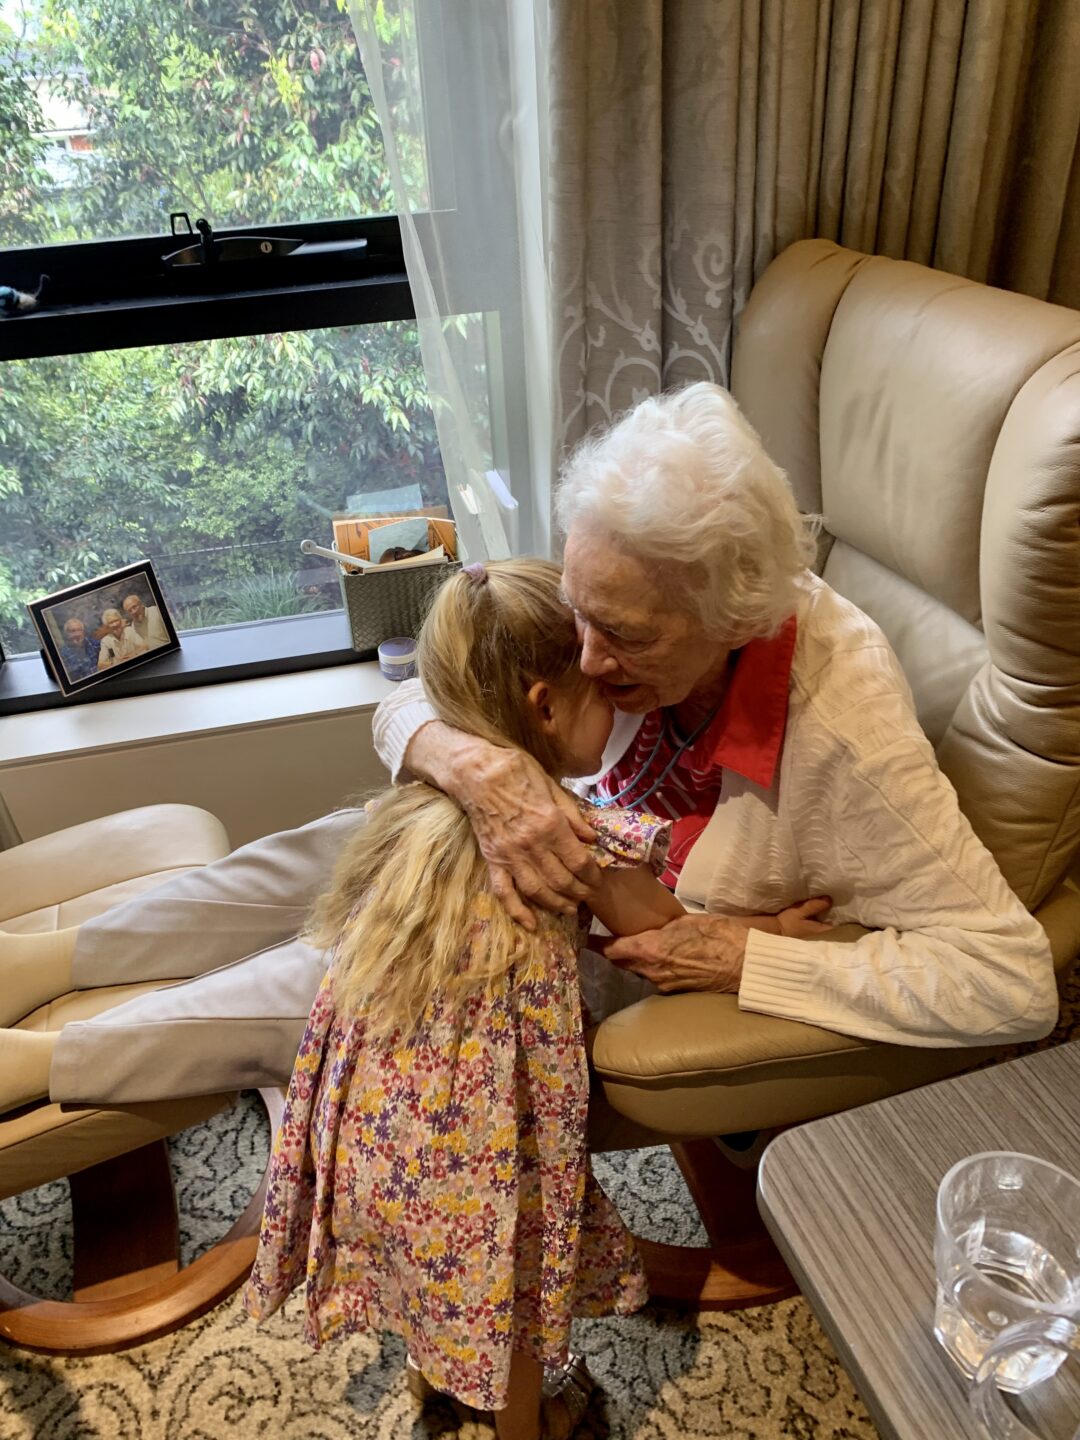 An elderly Caucasian woman with white hair hugging a small Caucasian girl with long blonde hair.